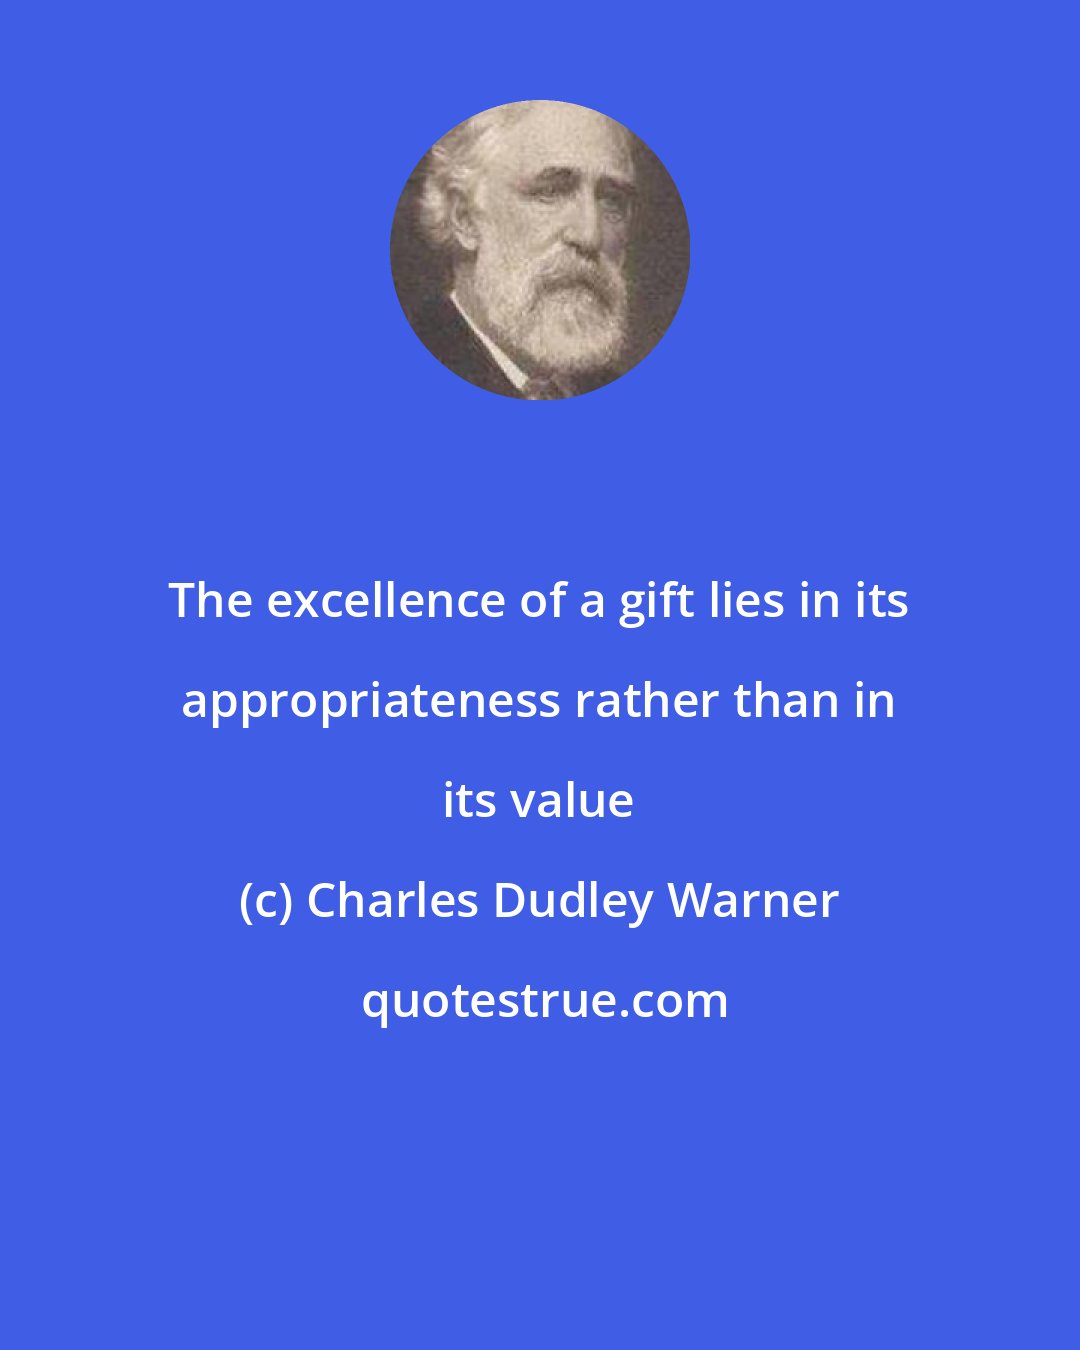 Charles Dudley Warner: The excellence of a gift lies in its appropriateness rather than in its value